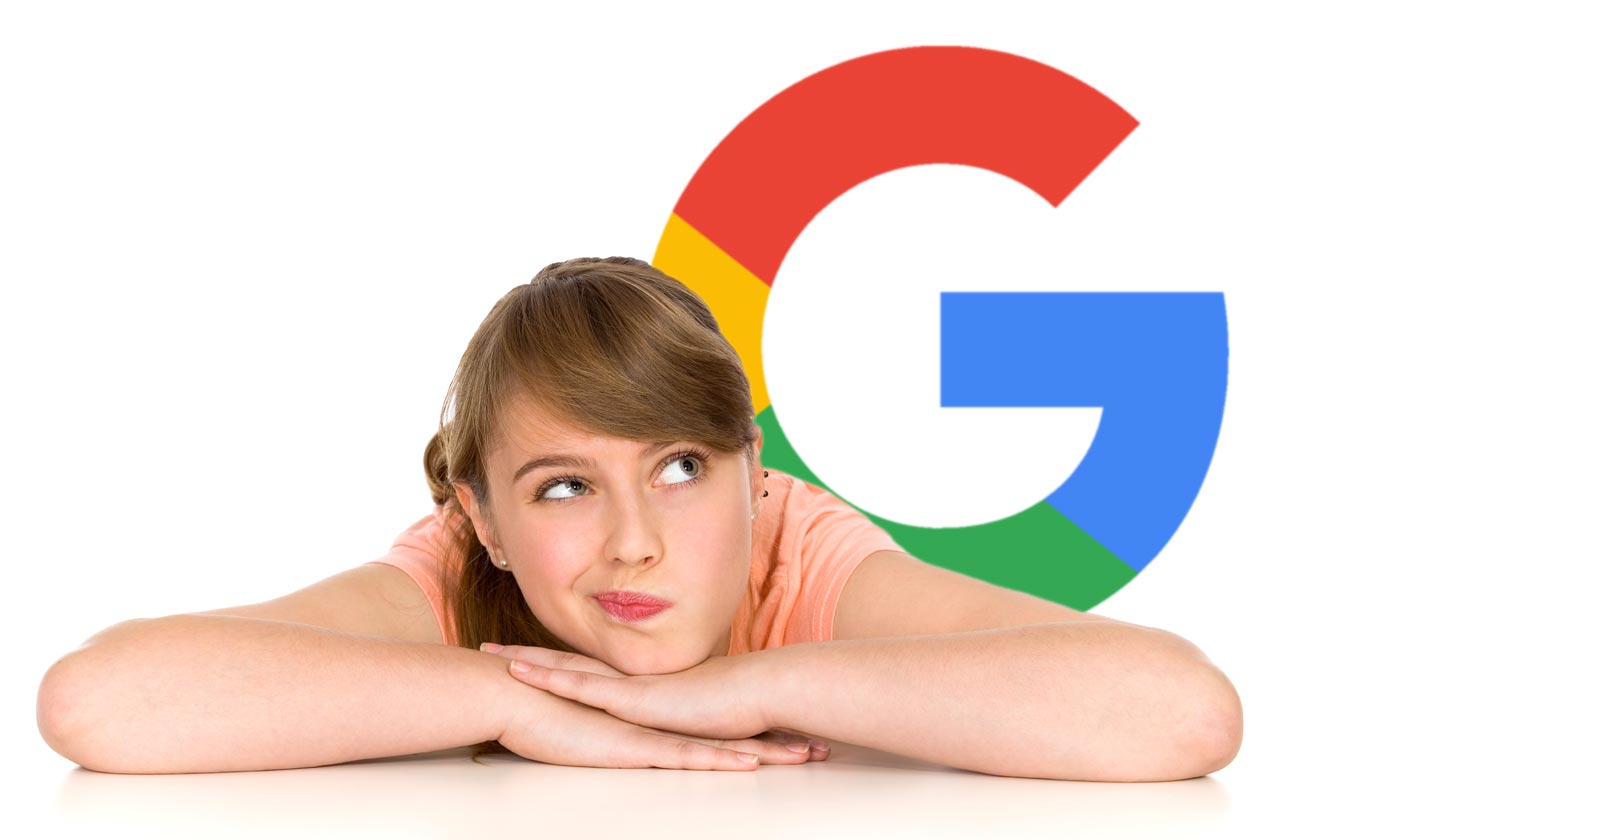 Google To Prioritize AI Overviews Ads Over Organic Search via @sejournal, @martinibuster